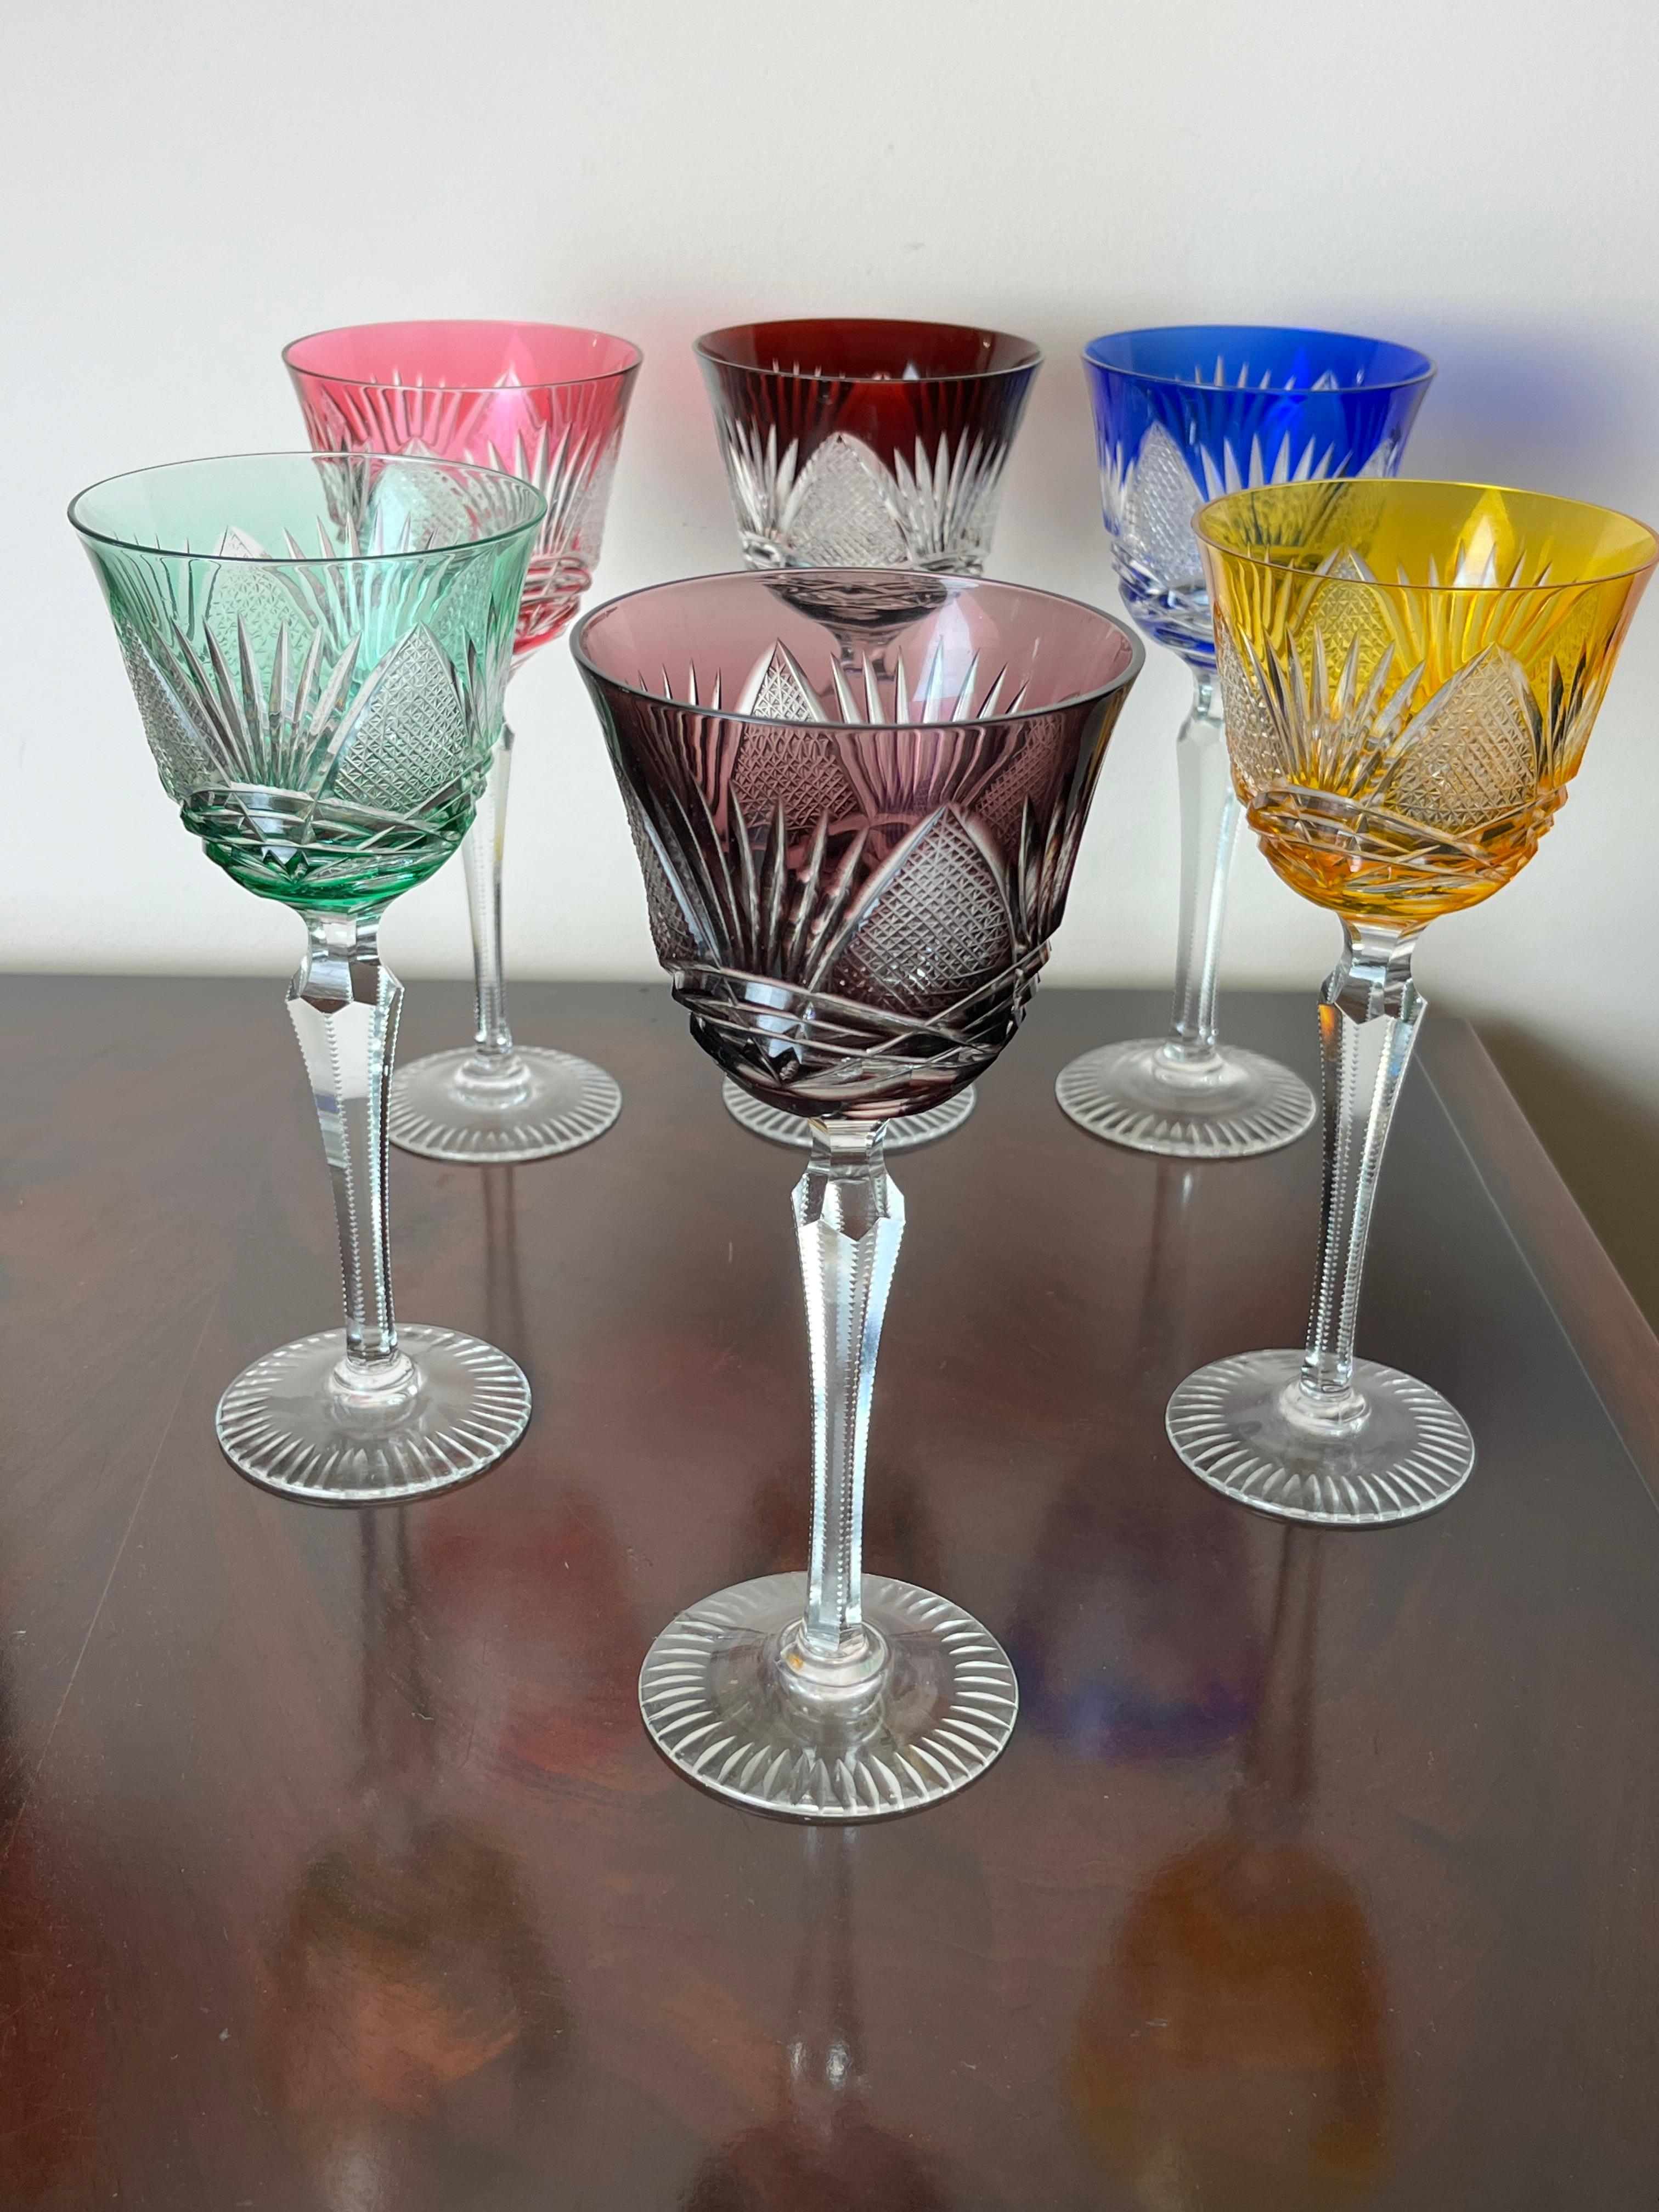 Mid-20th Century Set of 6 Colored Crystal Glasses, Italy, 1950s For Sale